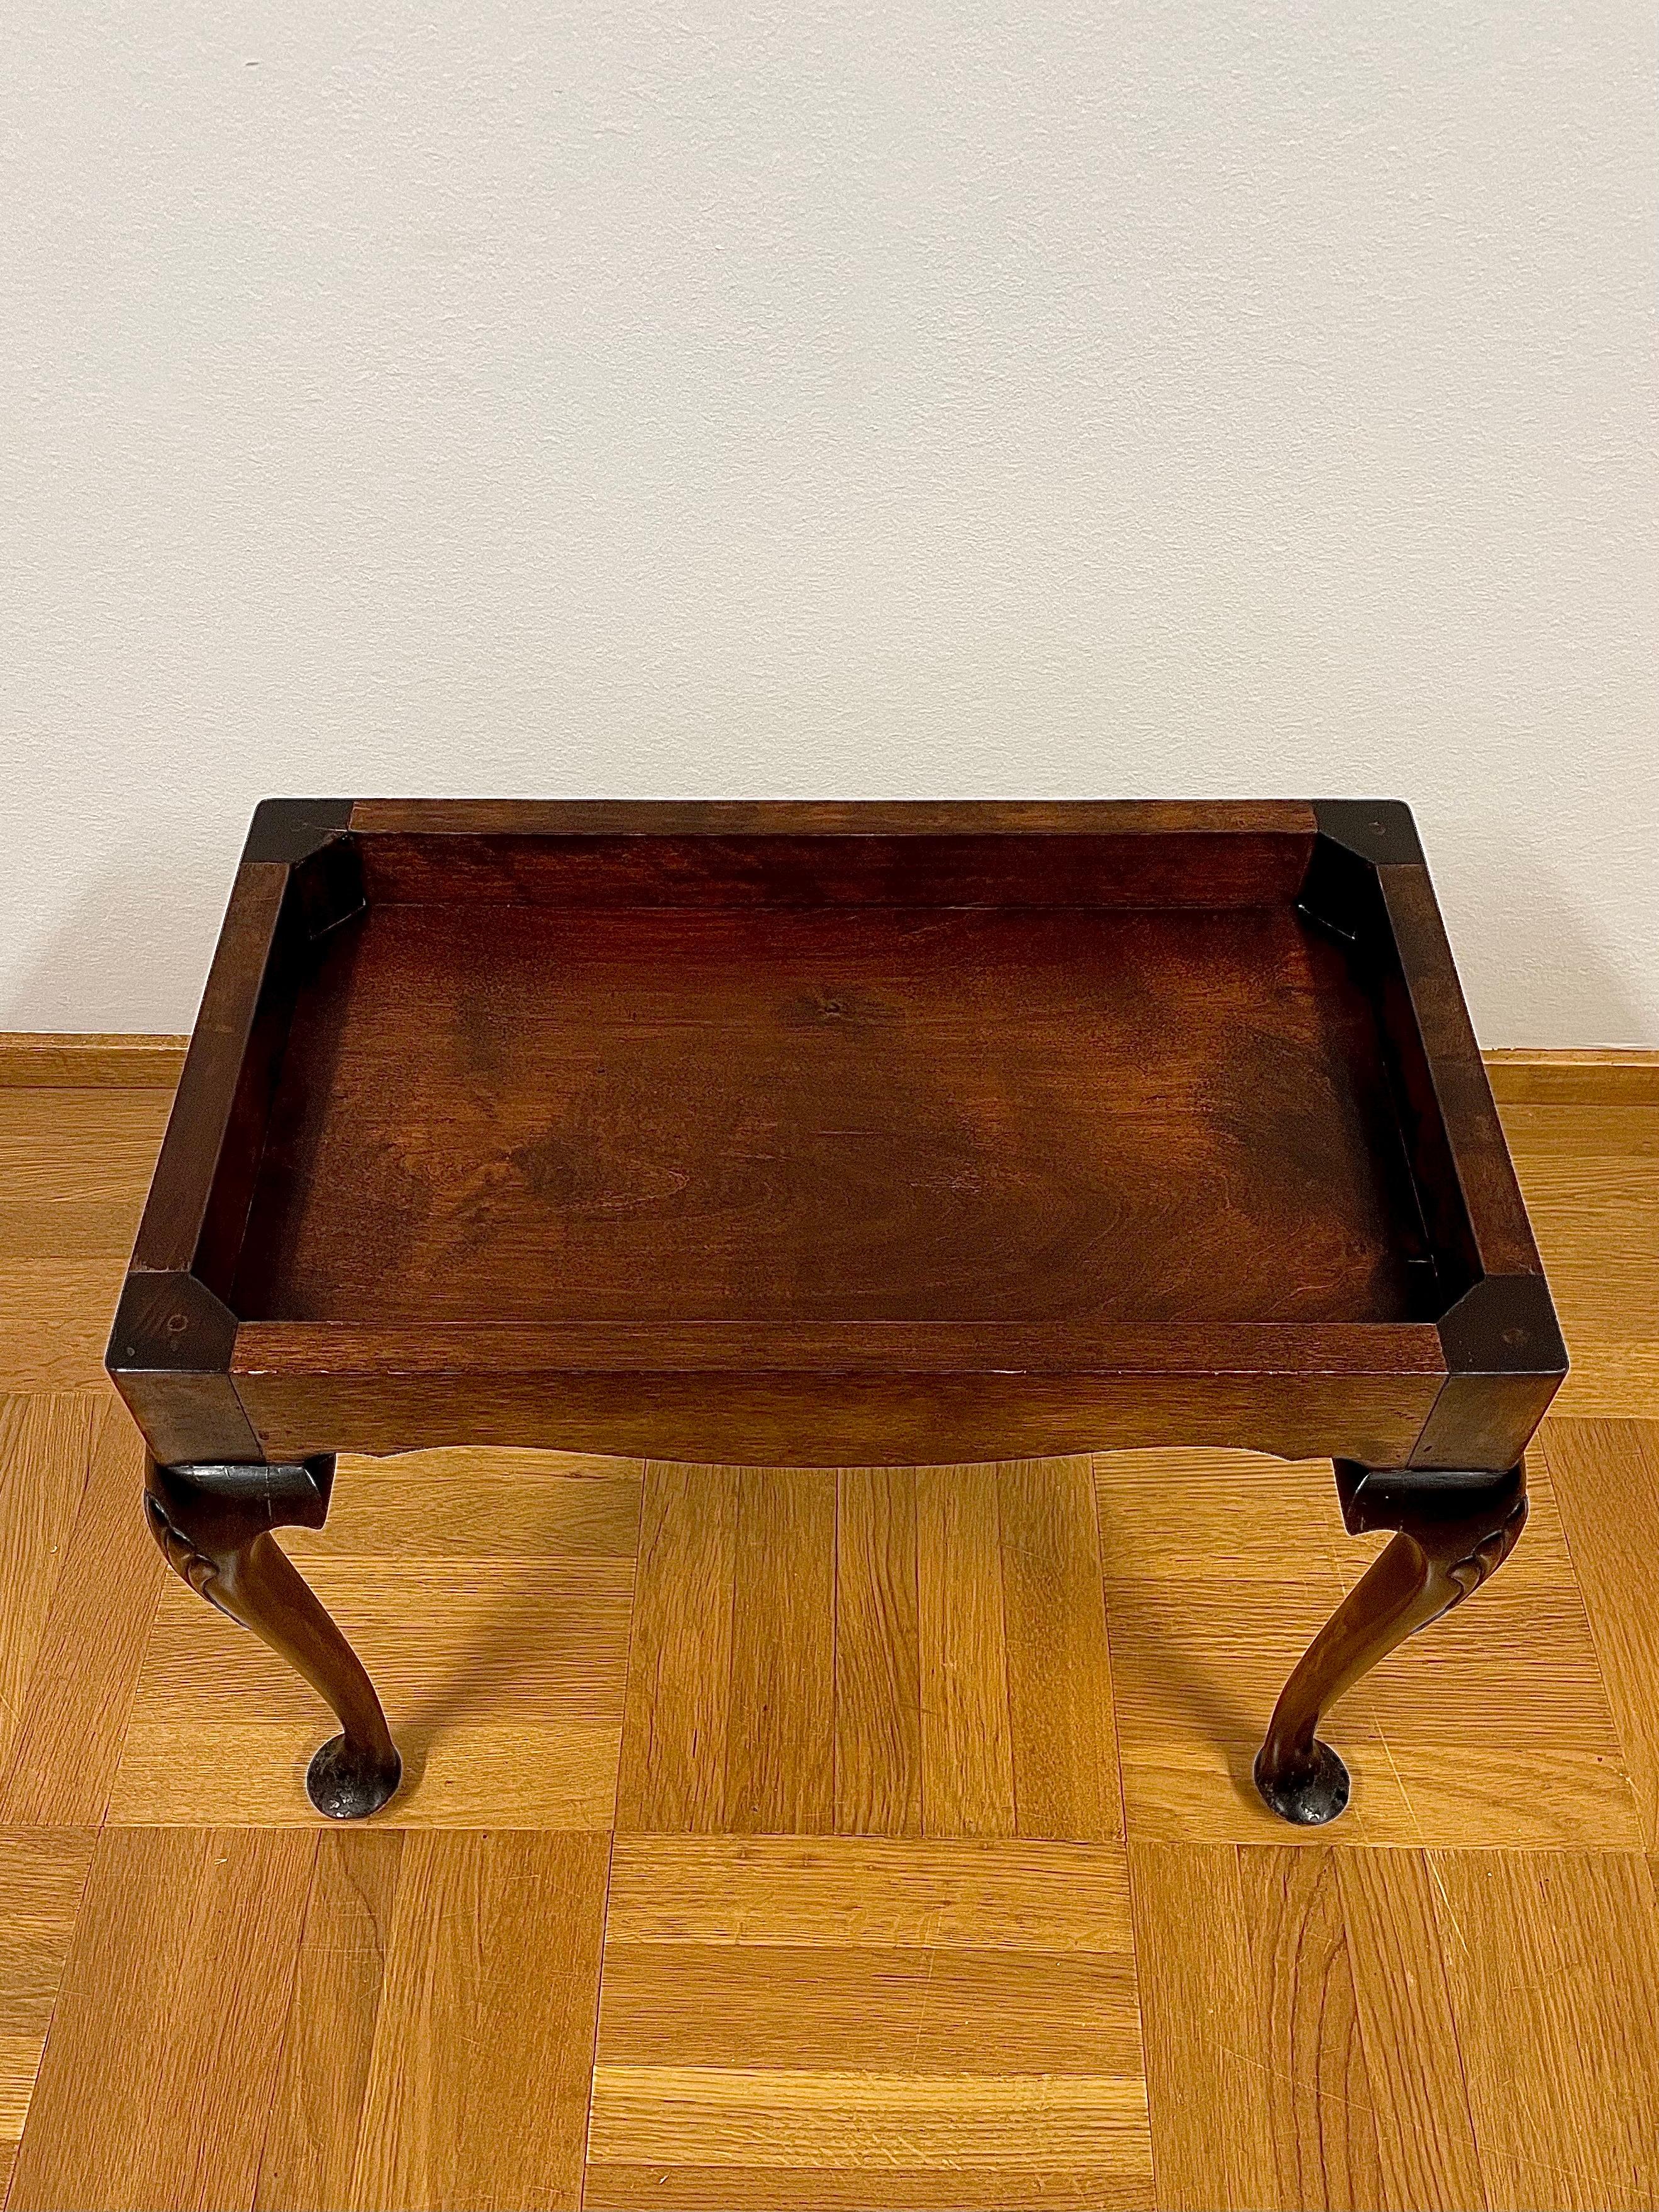 Swedish Tray Table in Stained Birch Manufactured 13/3 1929 by Nordiska Kompaniet For Sale 3